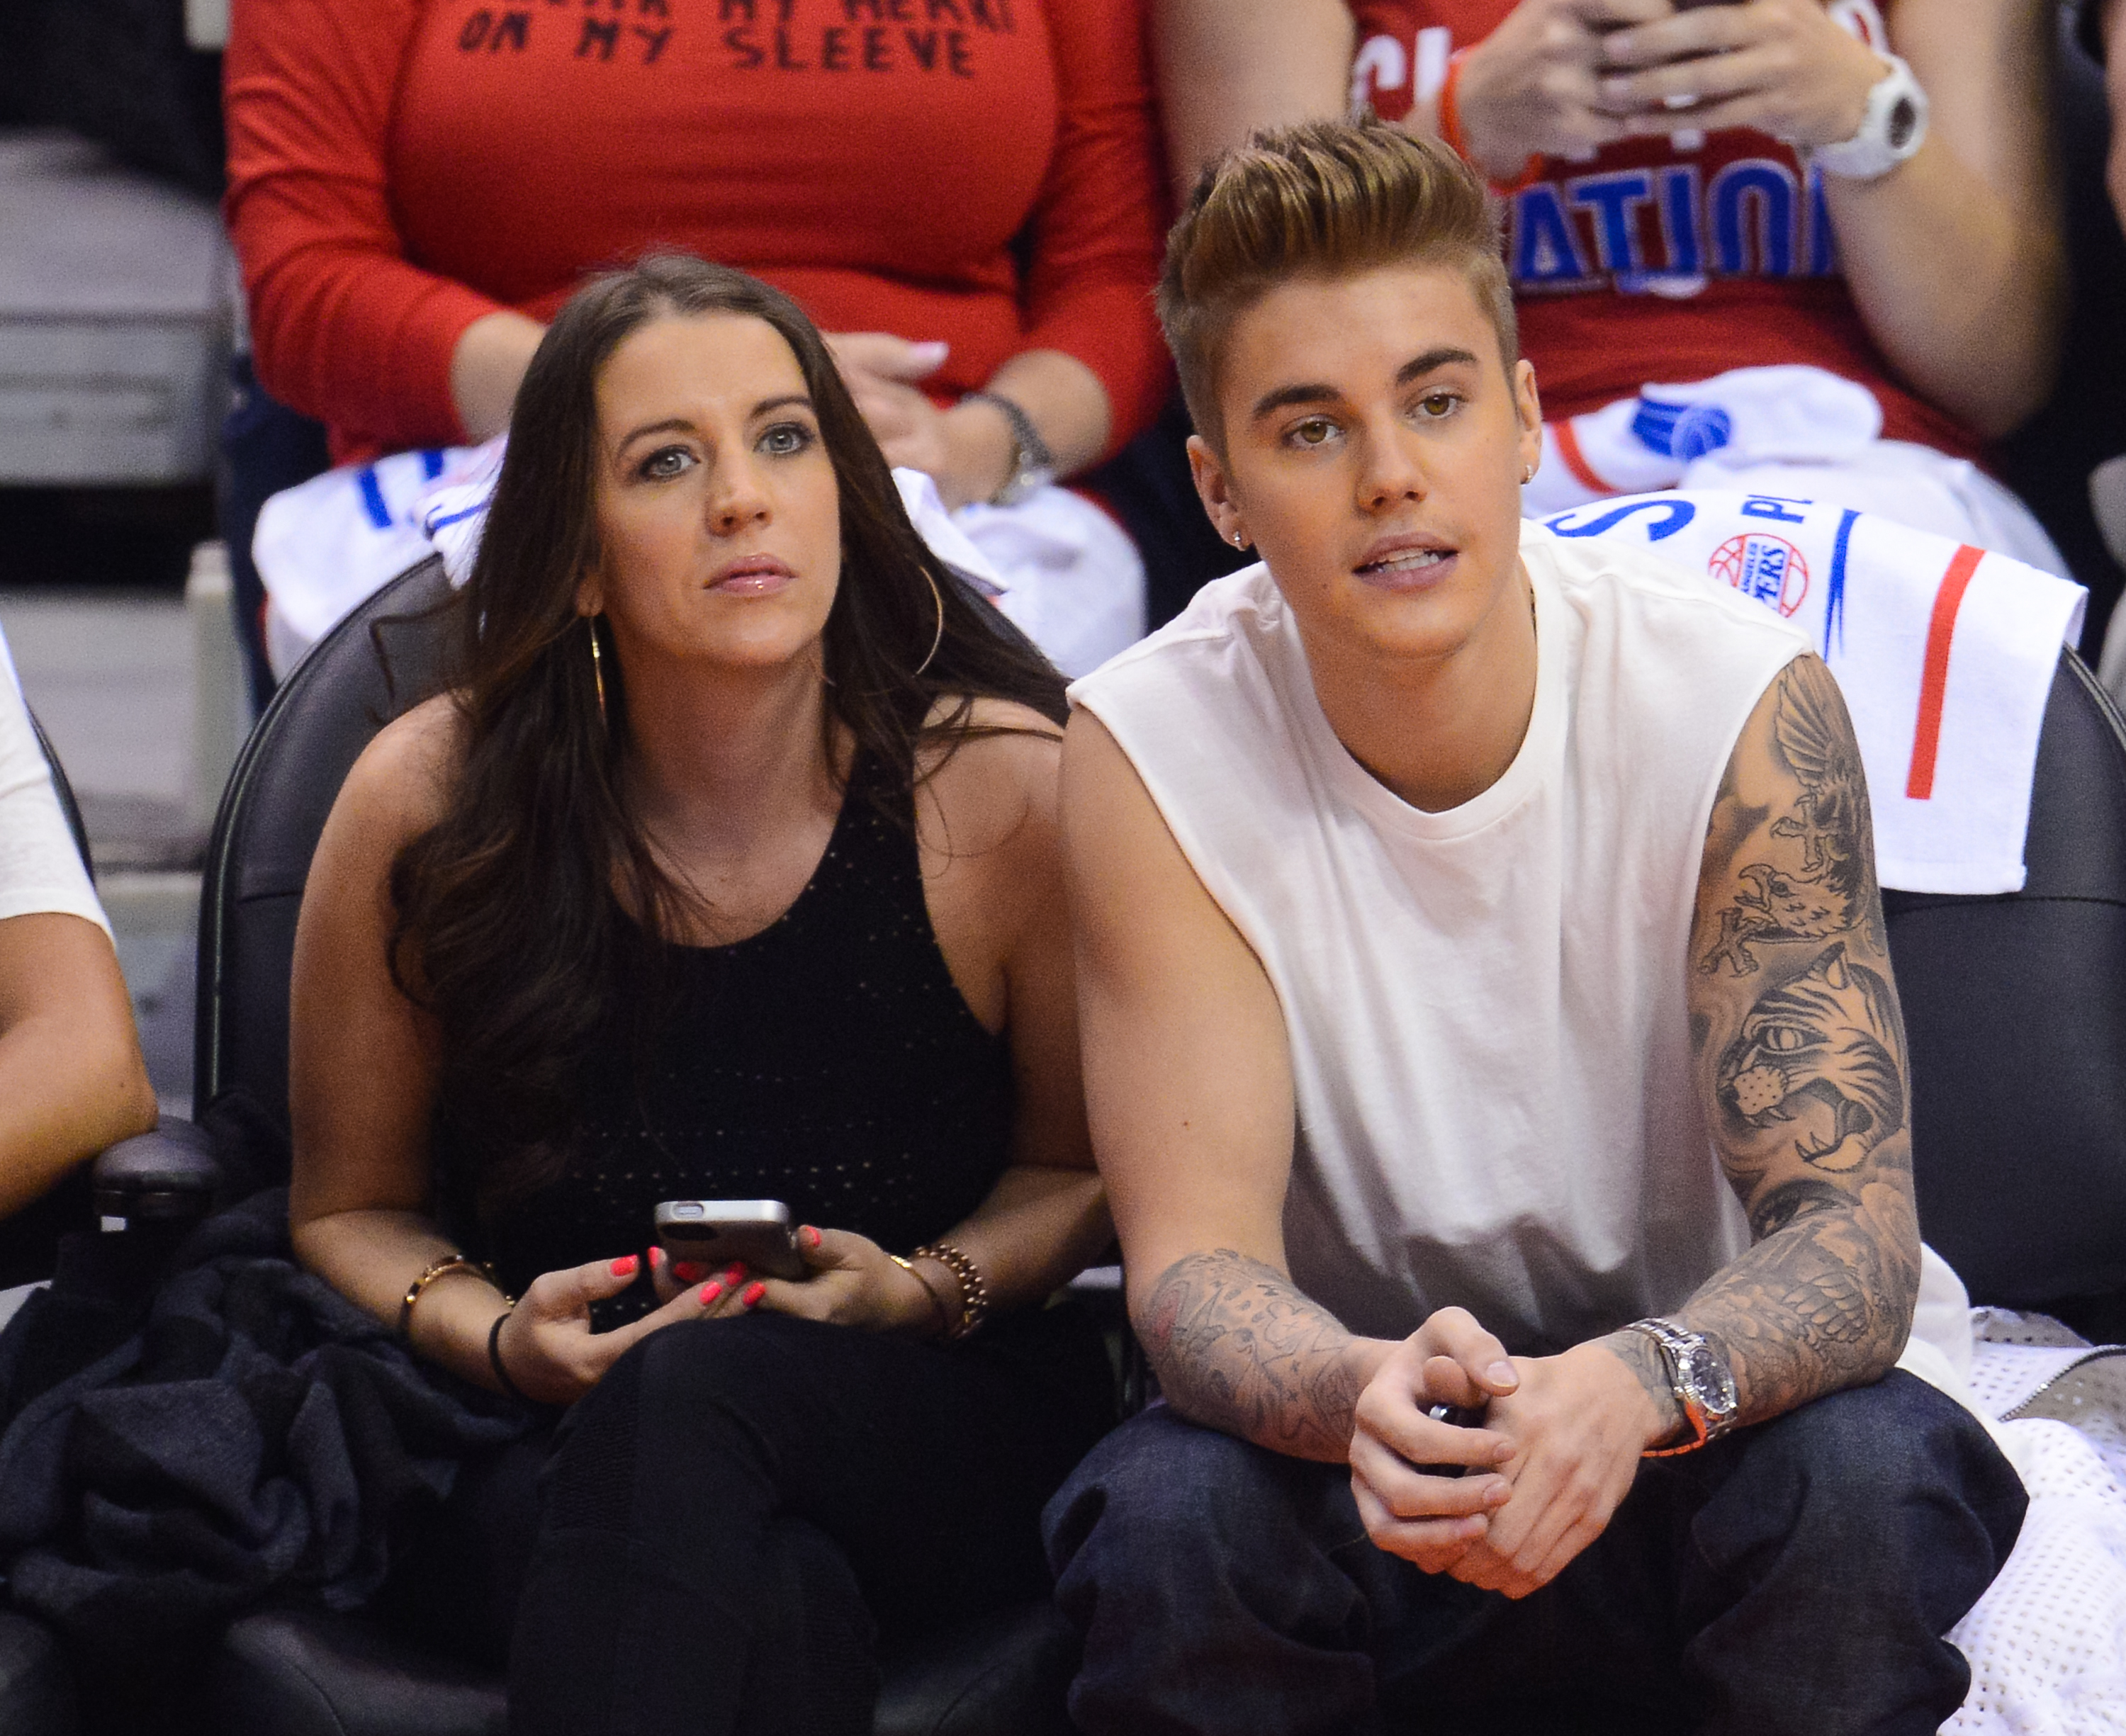 Justin Bieber and Pattie Mallette attend an NBA playoff game between the Oklahoma City Thunder and the Los Angeles Clippers in Los Angeles, California, on May 11, 2014. | Source: Getty Images